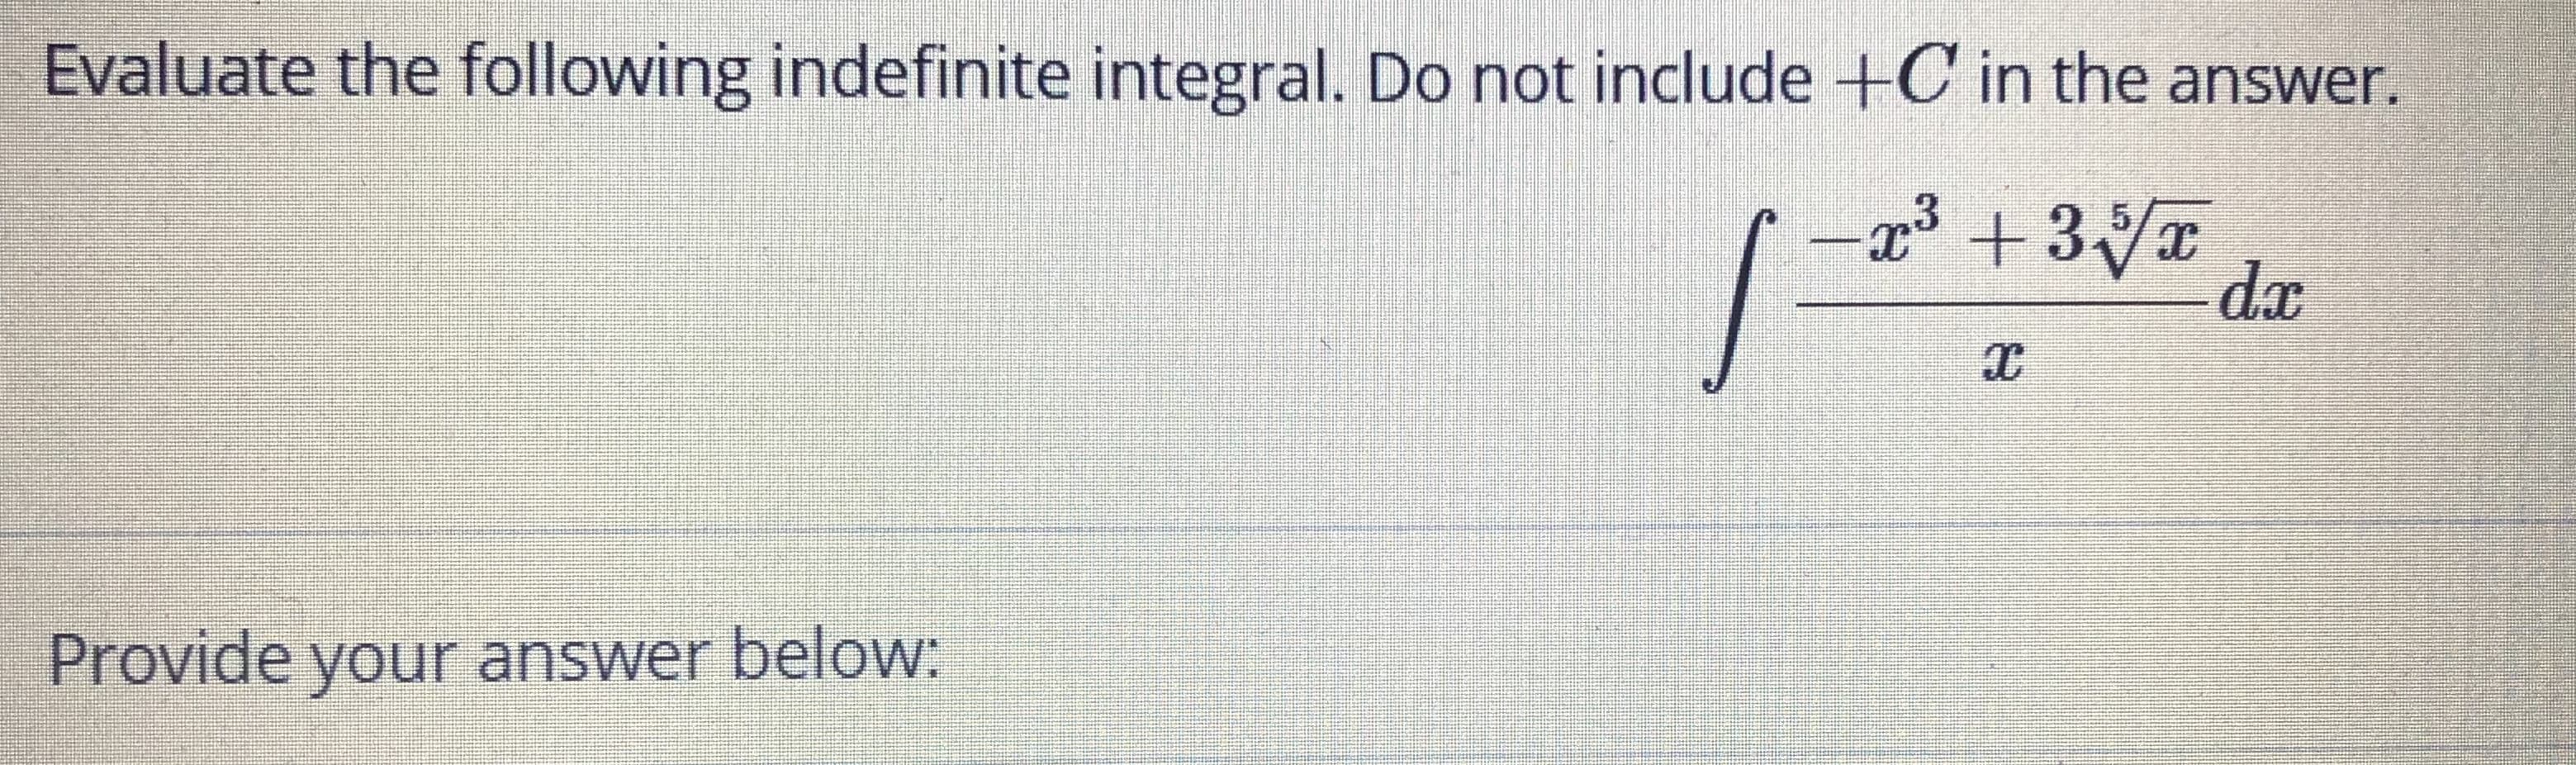 Evaluate the following indefinite integral. Do not include +C in the answer.
3
dx
